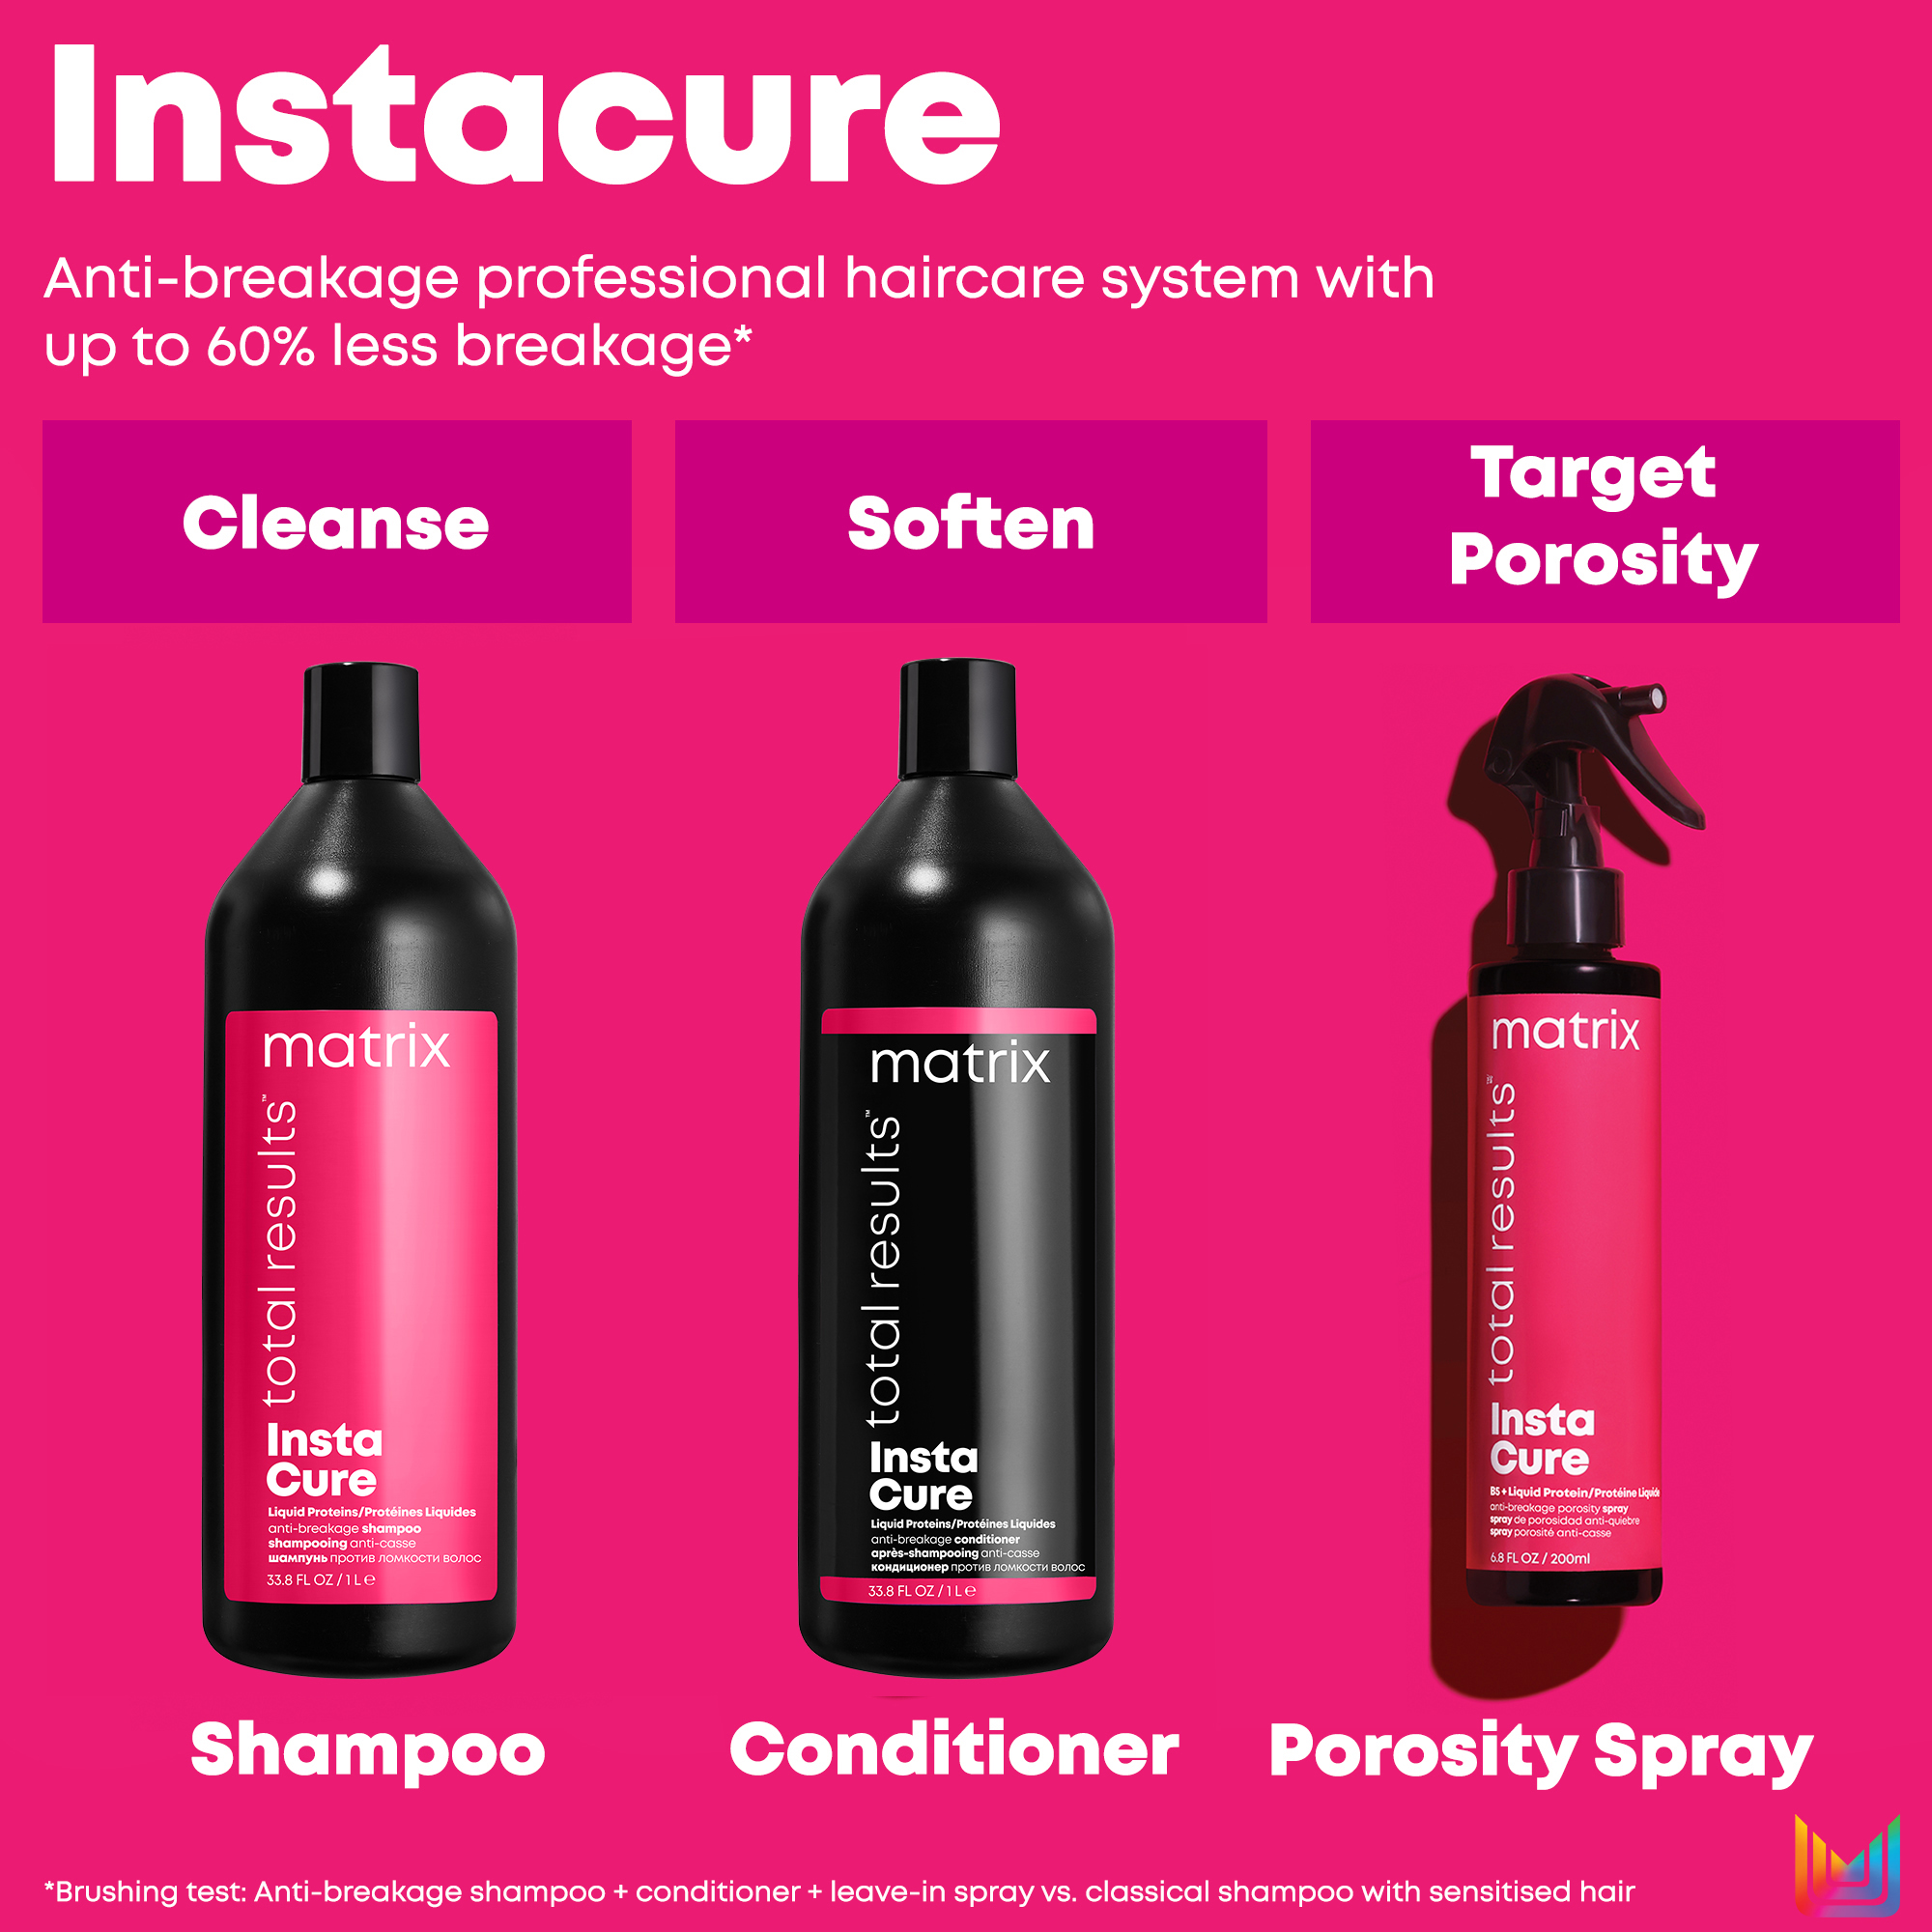 Instacure, anti-breakage professional haircare system with up to 60% less breakage* cleanse, soften, target porosity. *brushing test: anti-breakage shampoo + conditioner + leave in sprat vs classical shampoo with sensitied hair